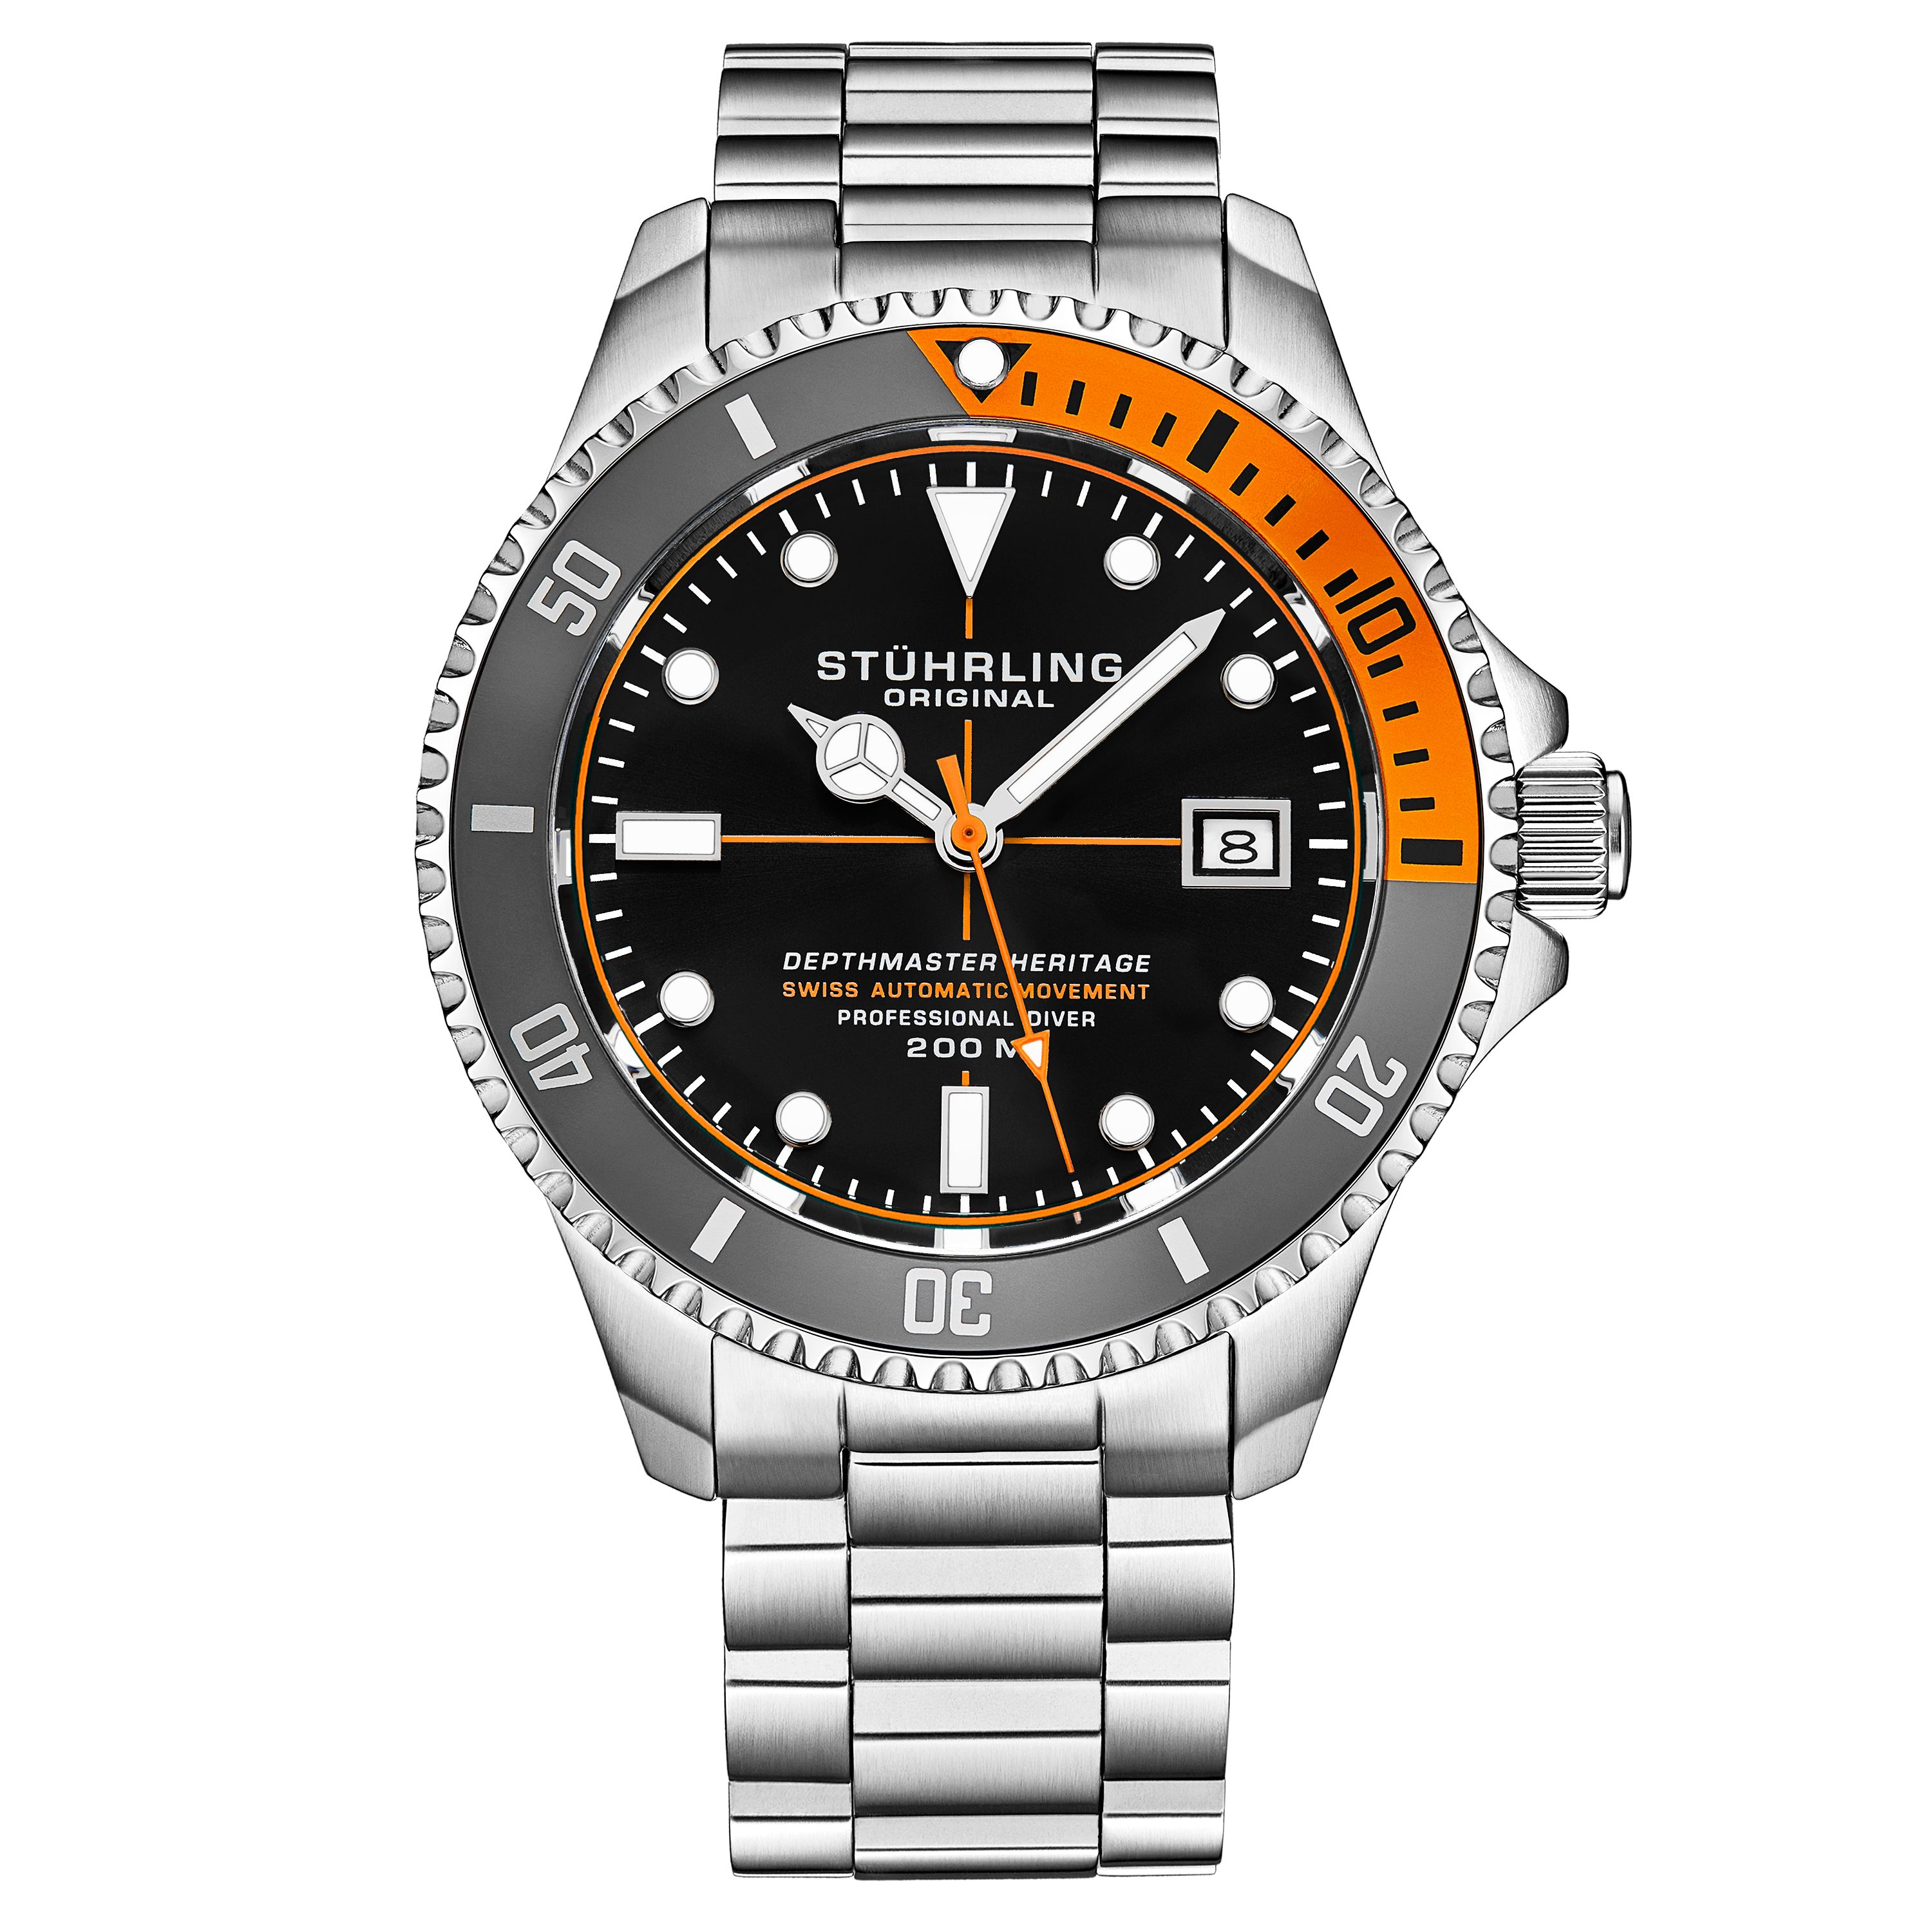 Men's Swiss Automatic Watch, Stainless Steel Case, Black Dial, Stainless Steel Bracelet, Exhibition Caseback, Thick Domed Crystal, 20ATM, Gray and Orange Bezel